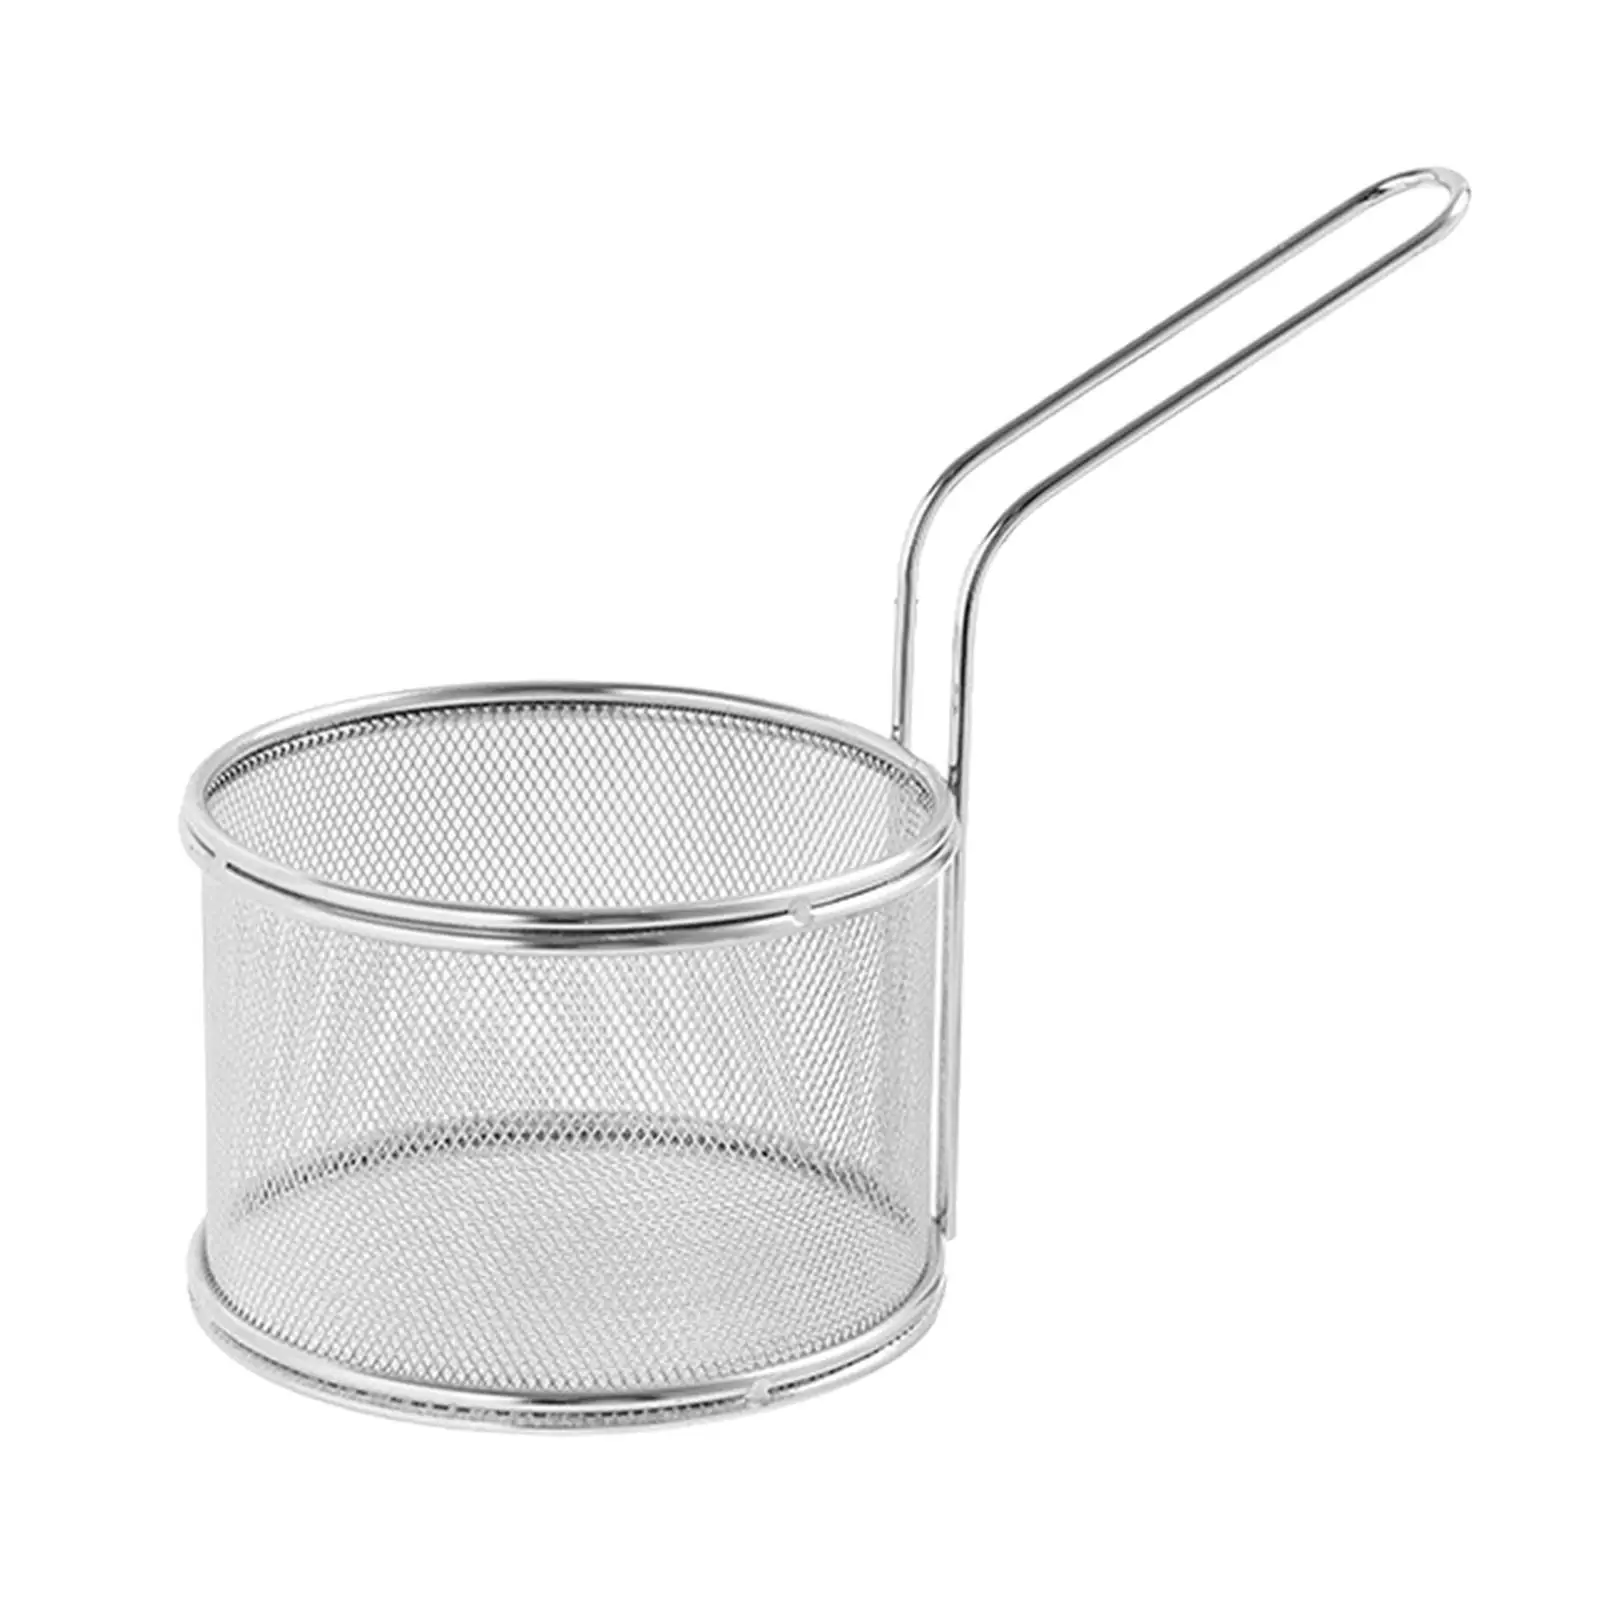 Deep Fry Basket French Fries Holder Stainless Steel for Home Cafe Barbecue